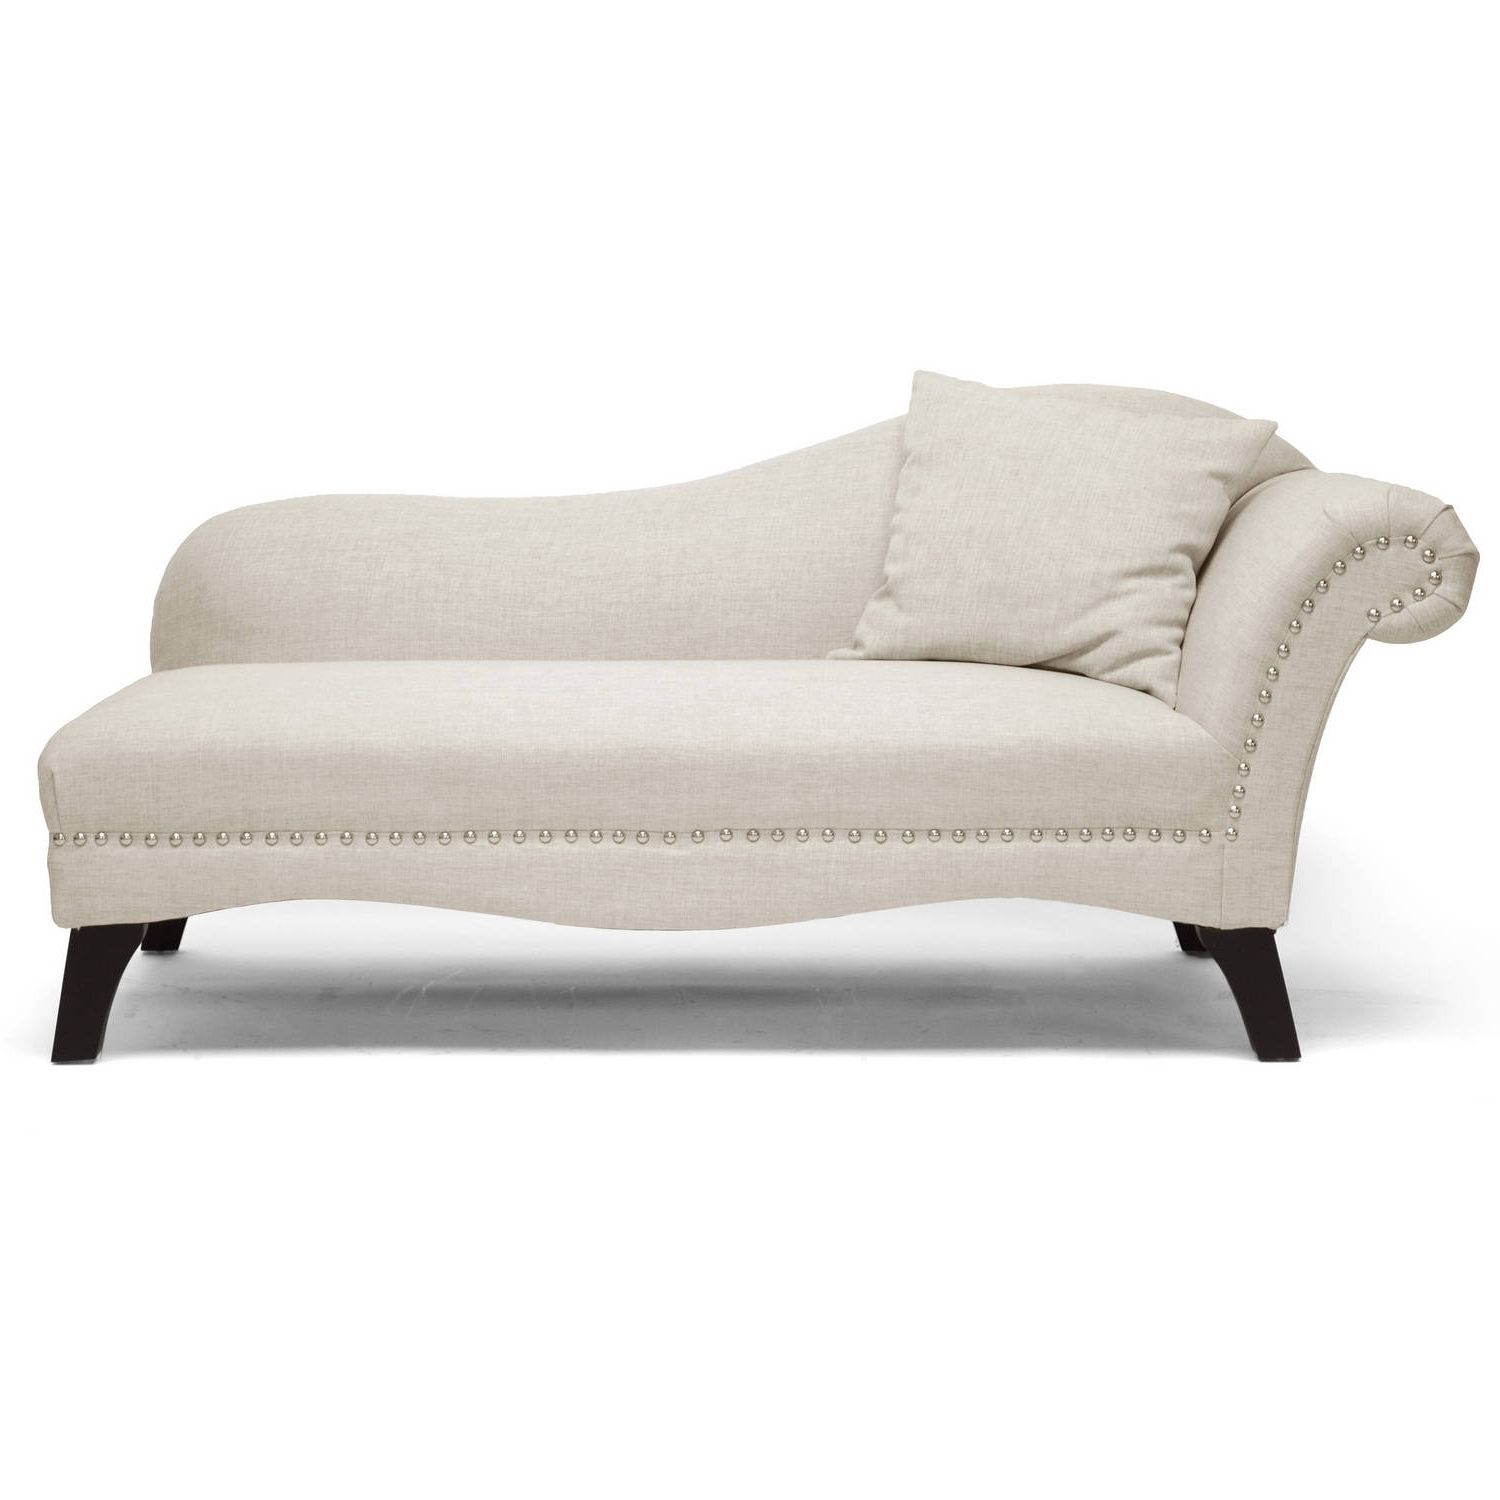 Chaise Lounges – Walmart Throughout Famous Chaise Lounge Chairs Under $ (View 2 of 15)